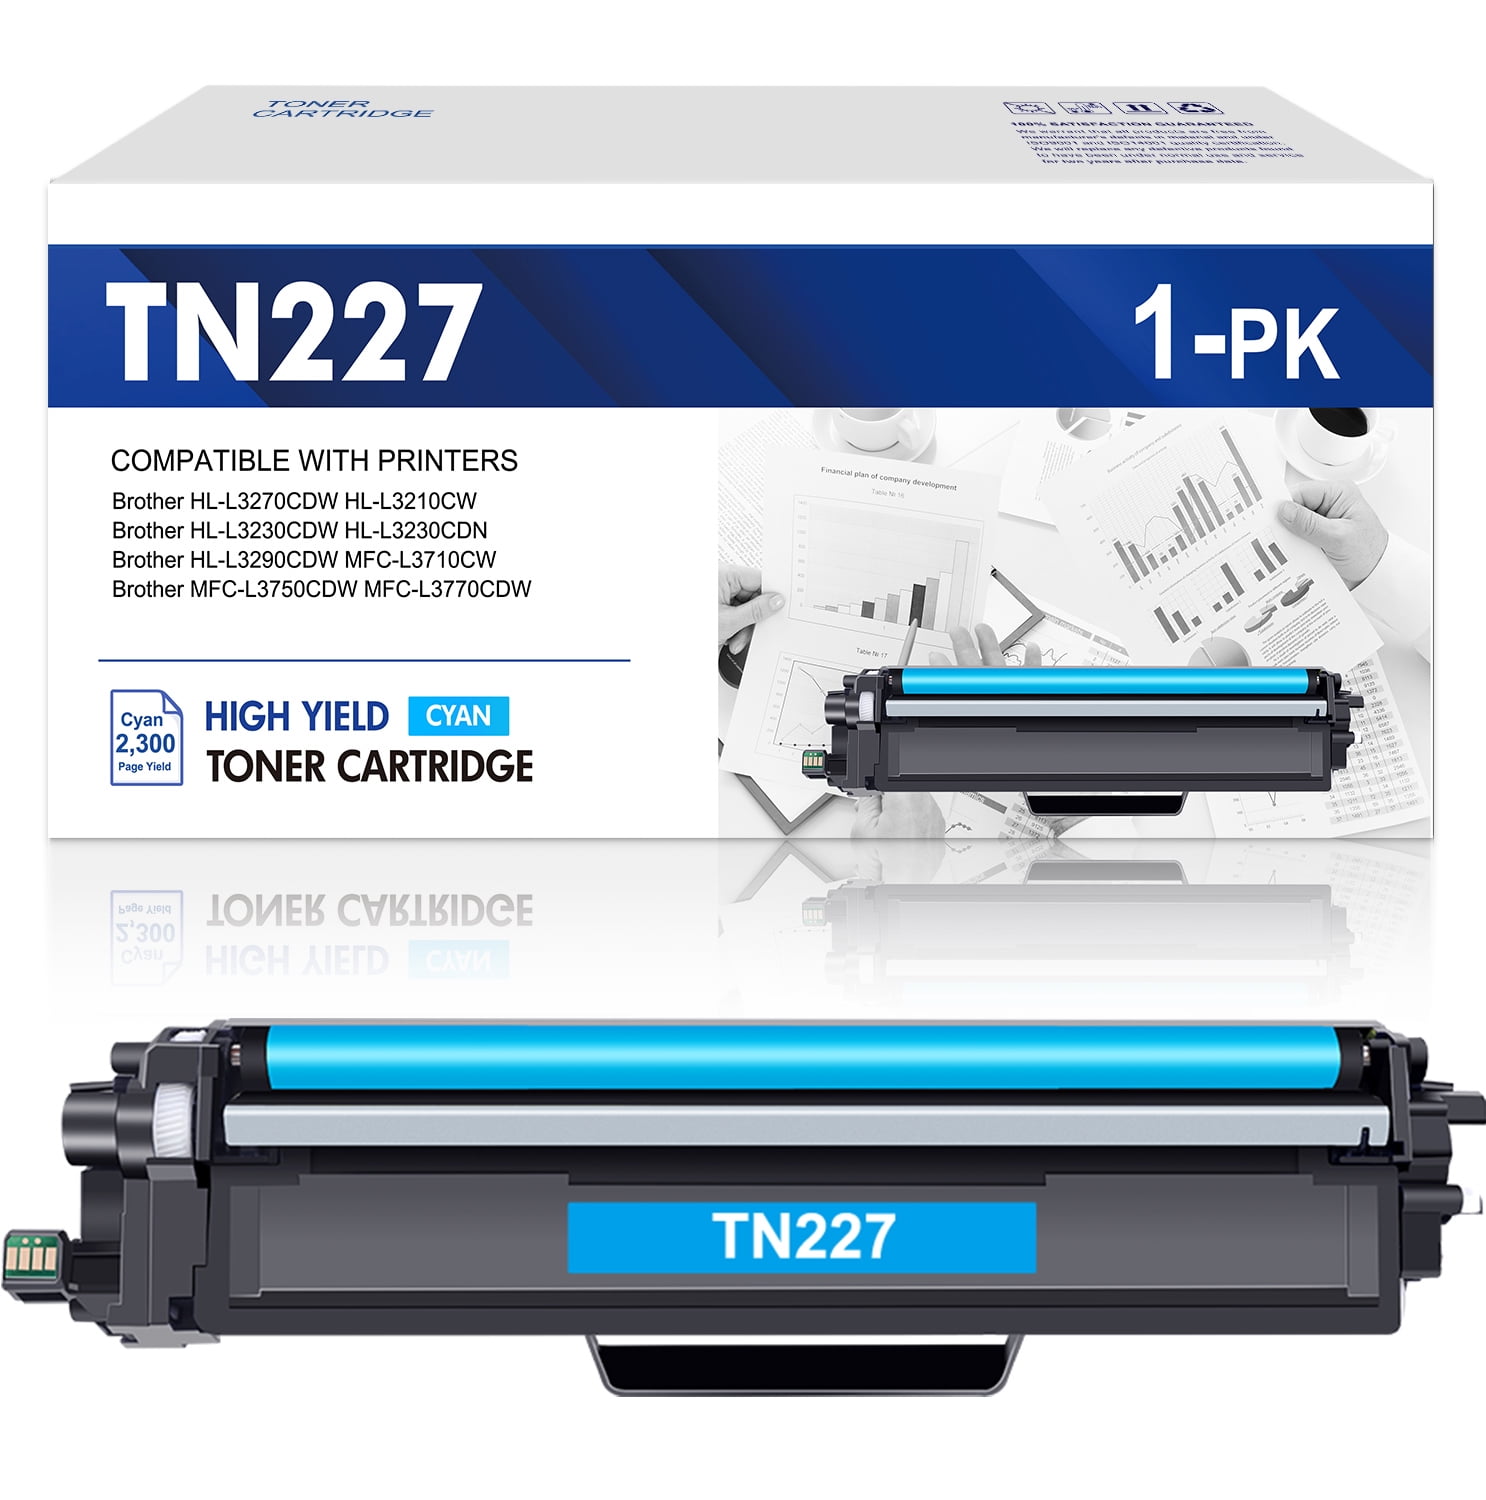 2 Pack Black TN227 High Yield Toner Replacement for Brother MFC-L3710CW  MFC-L3730CDW MFC-L3750CDW MFC-L3770CDW DCP-L3510CDW DCP-L3550CDW HL-L3210CW